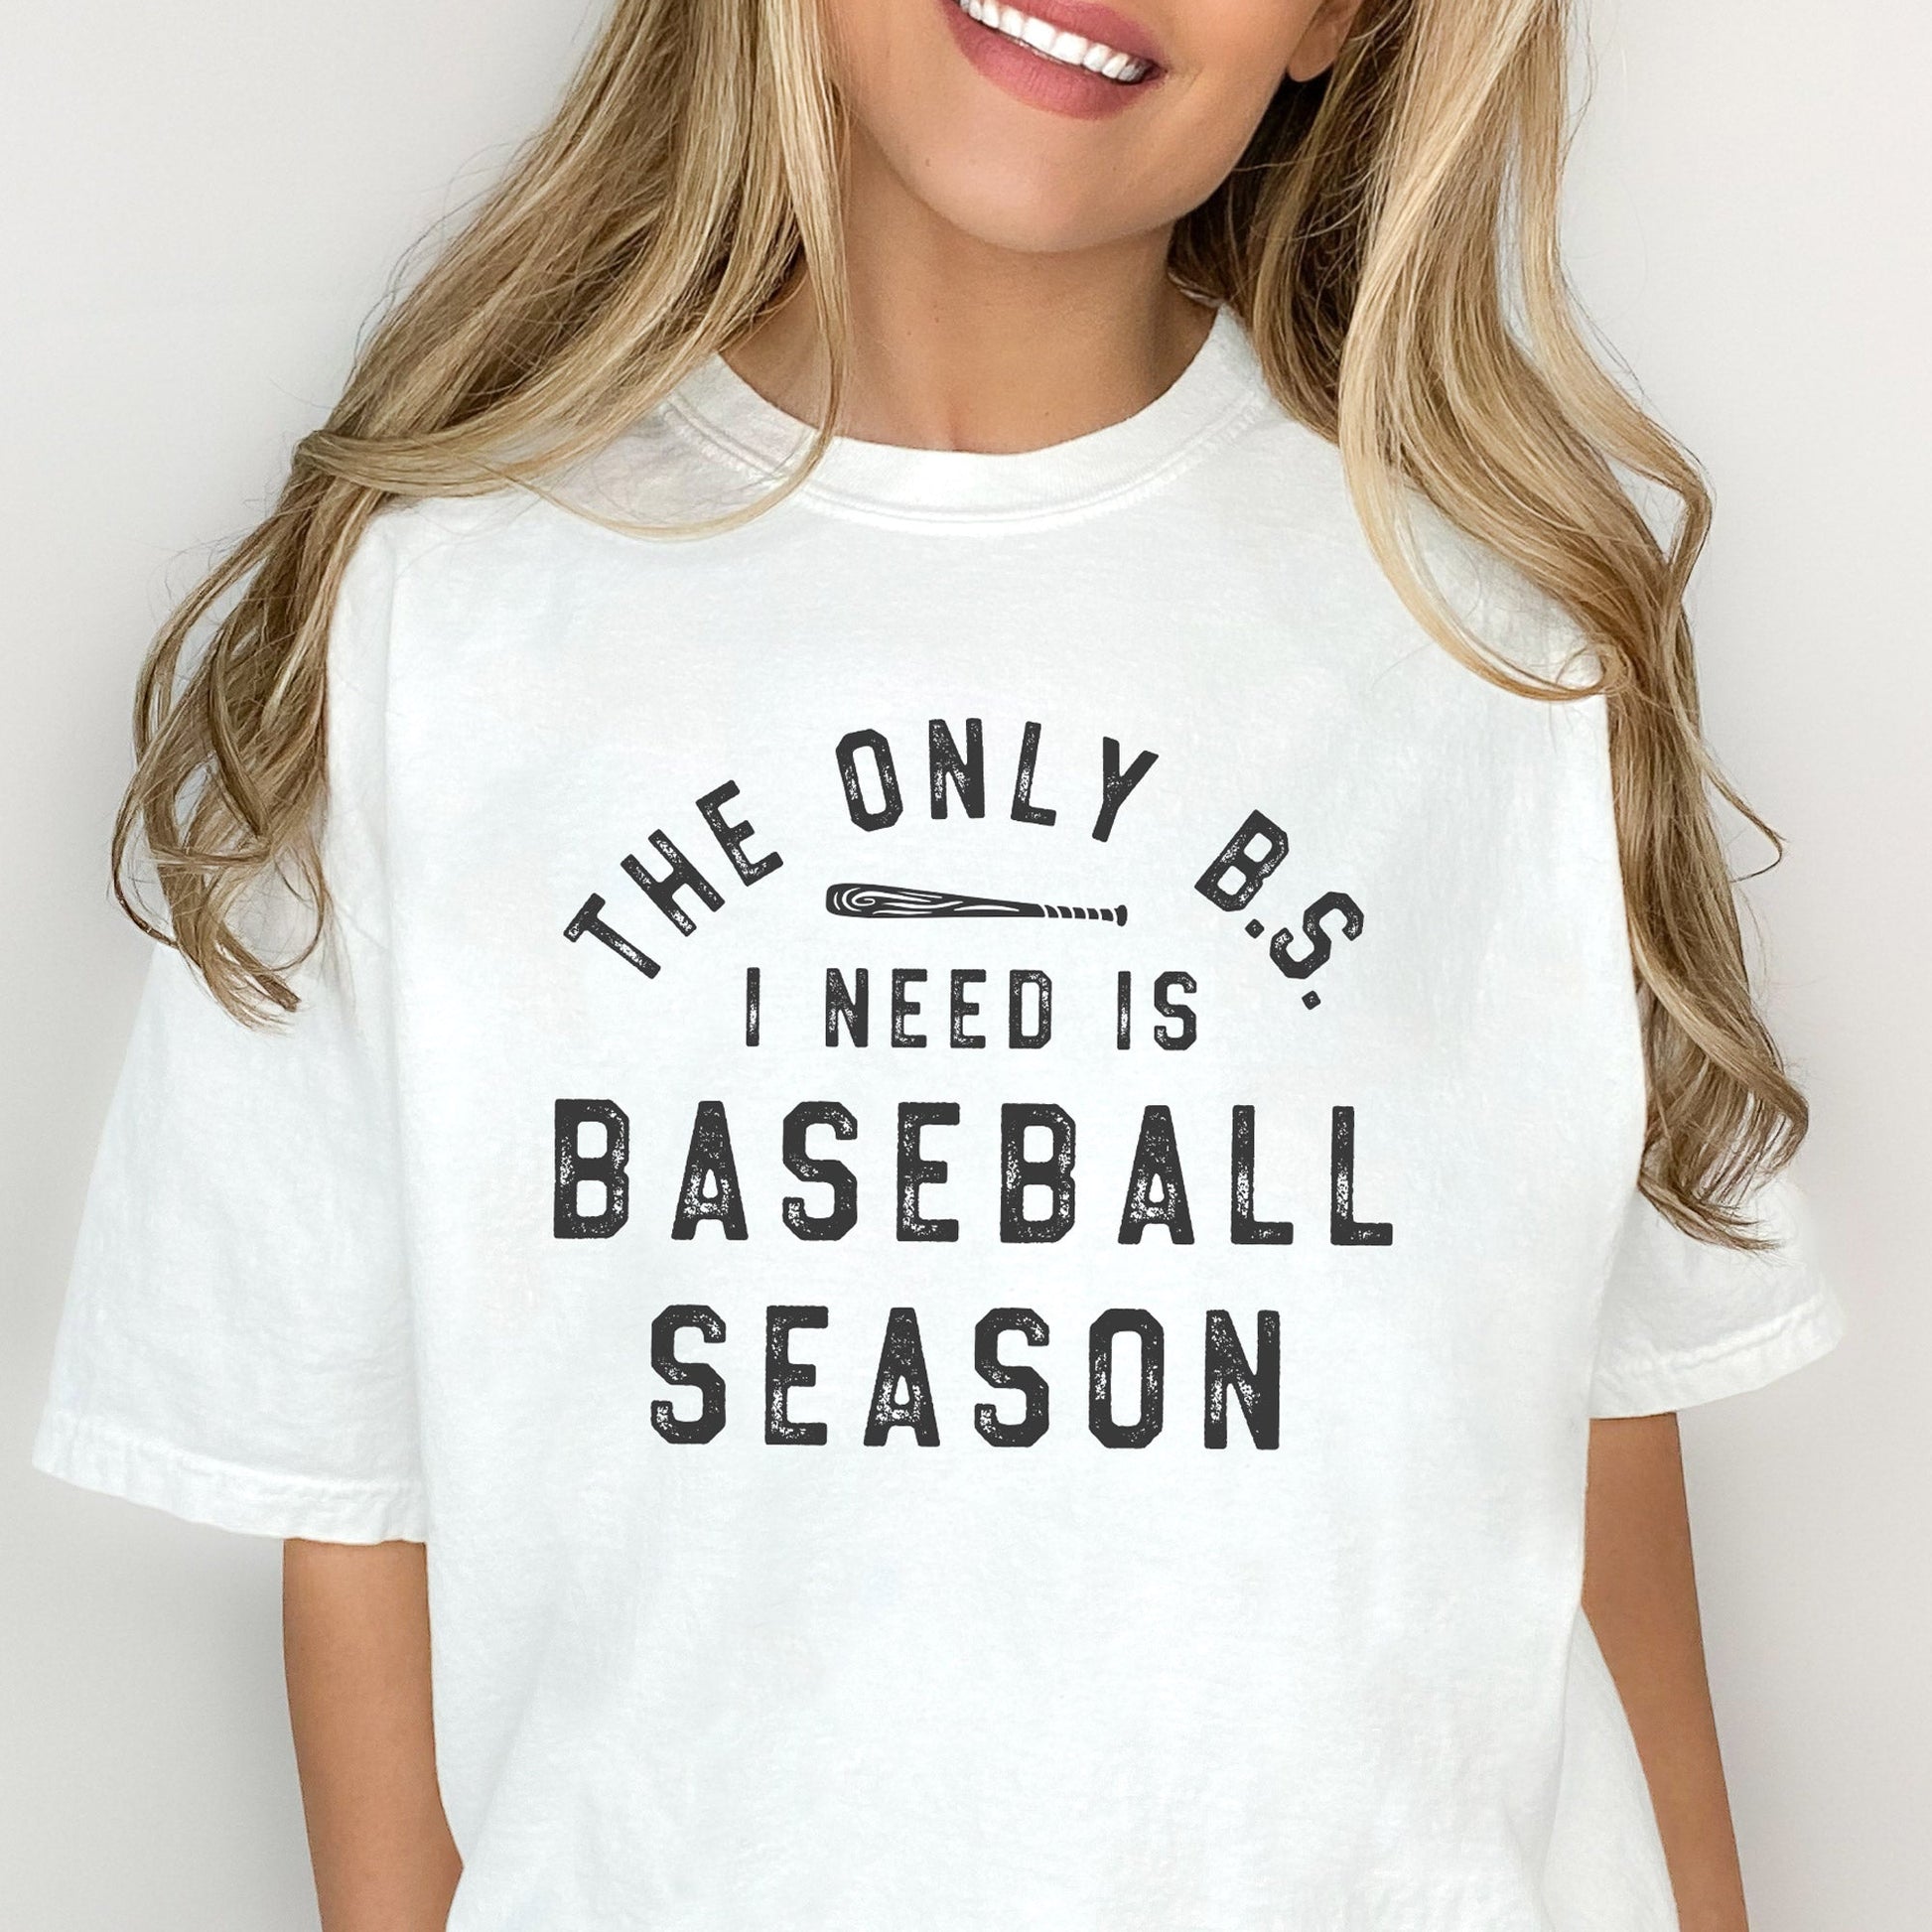 woman wearing an oversized white t-shirt featuring a distressed printed design reading 'the only b.s. i need is baseball season'